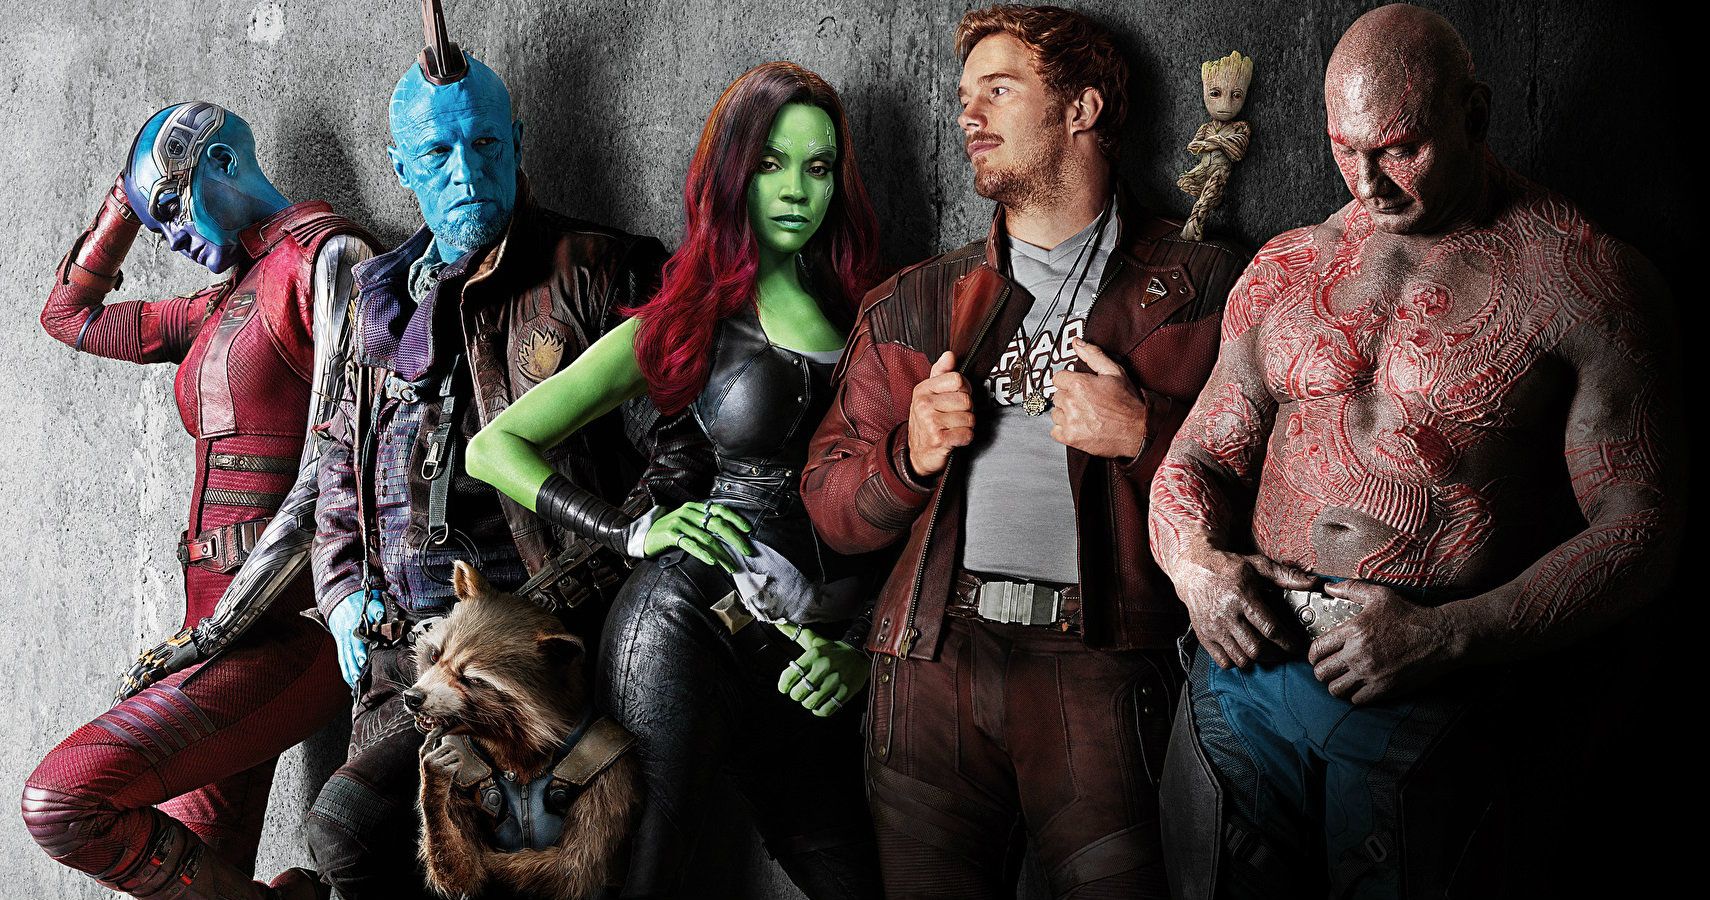 10 Awesome Behind The Scenes Facts About The Guardians Of The